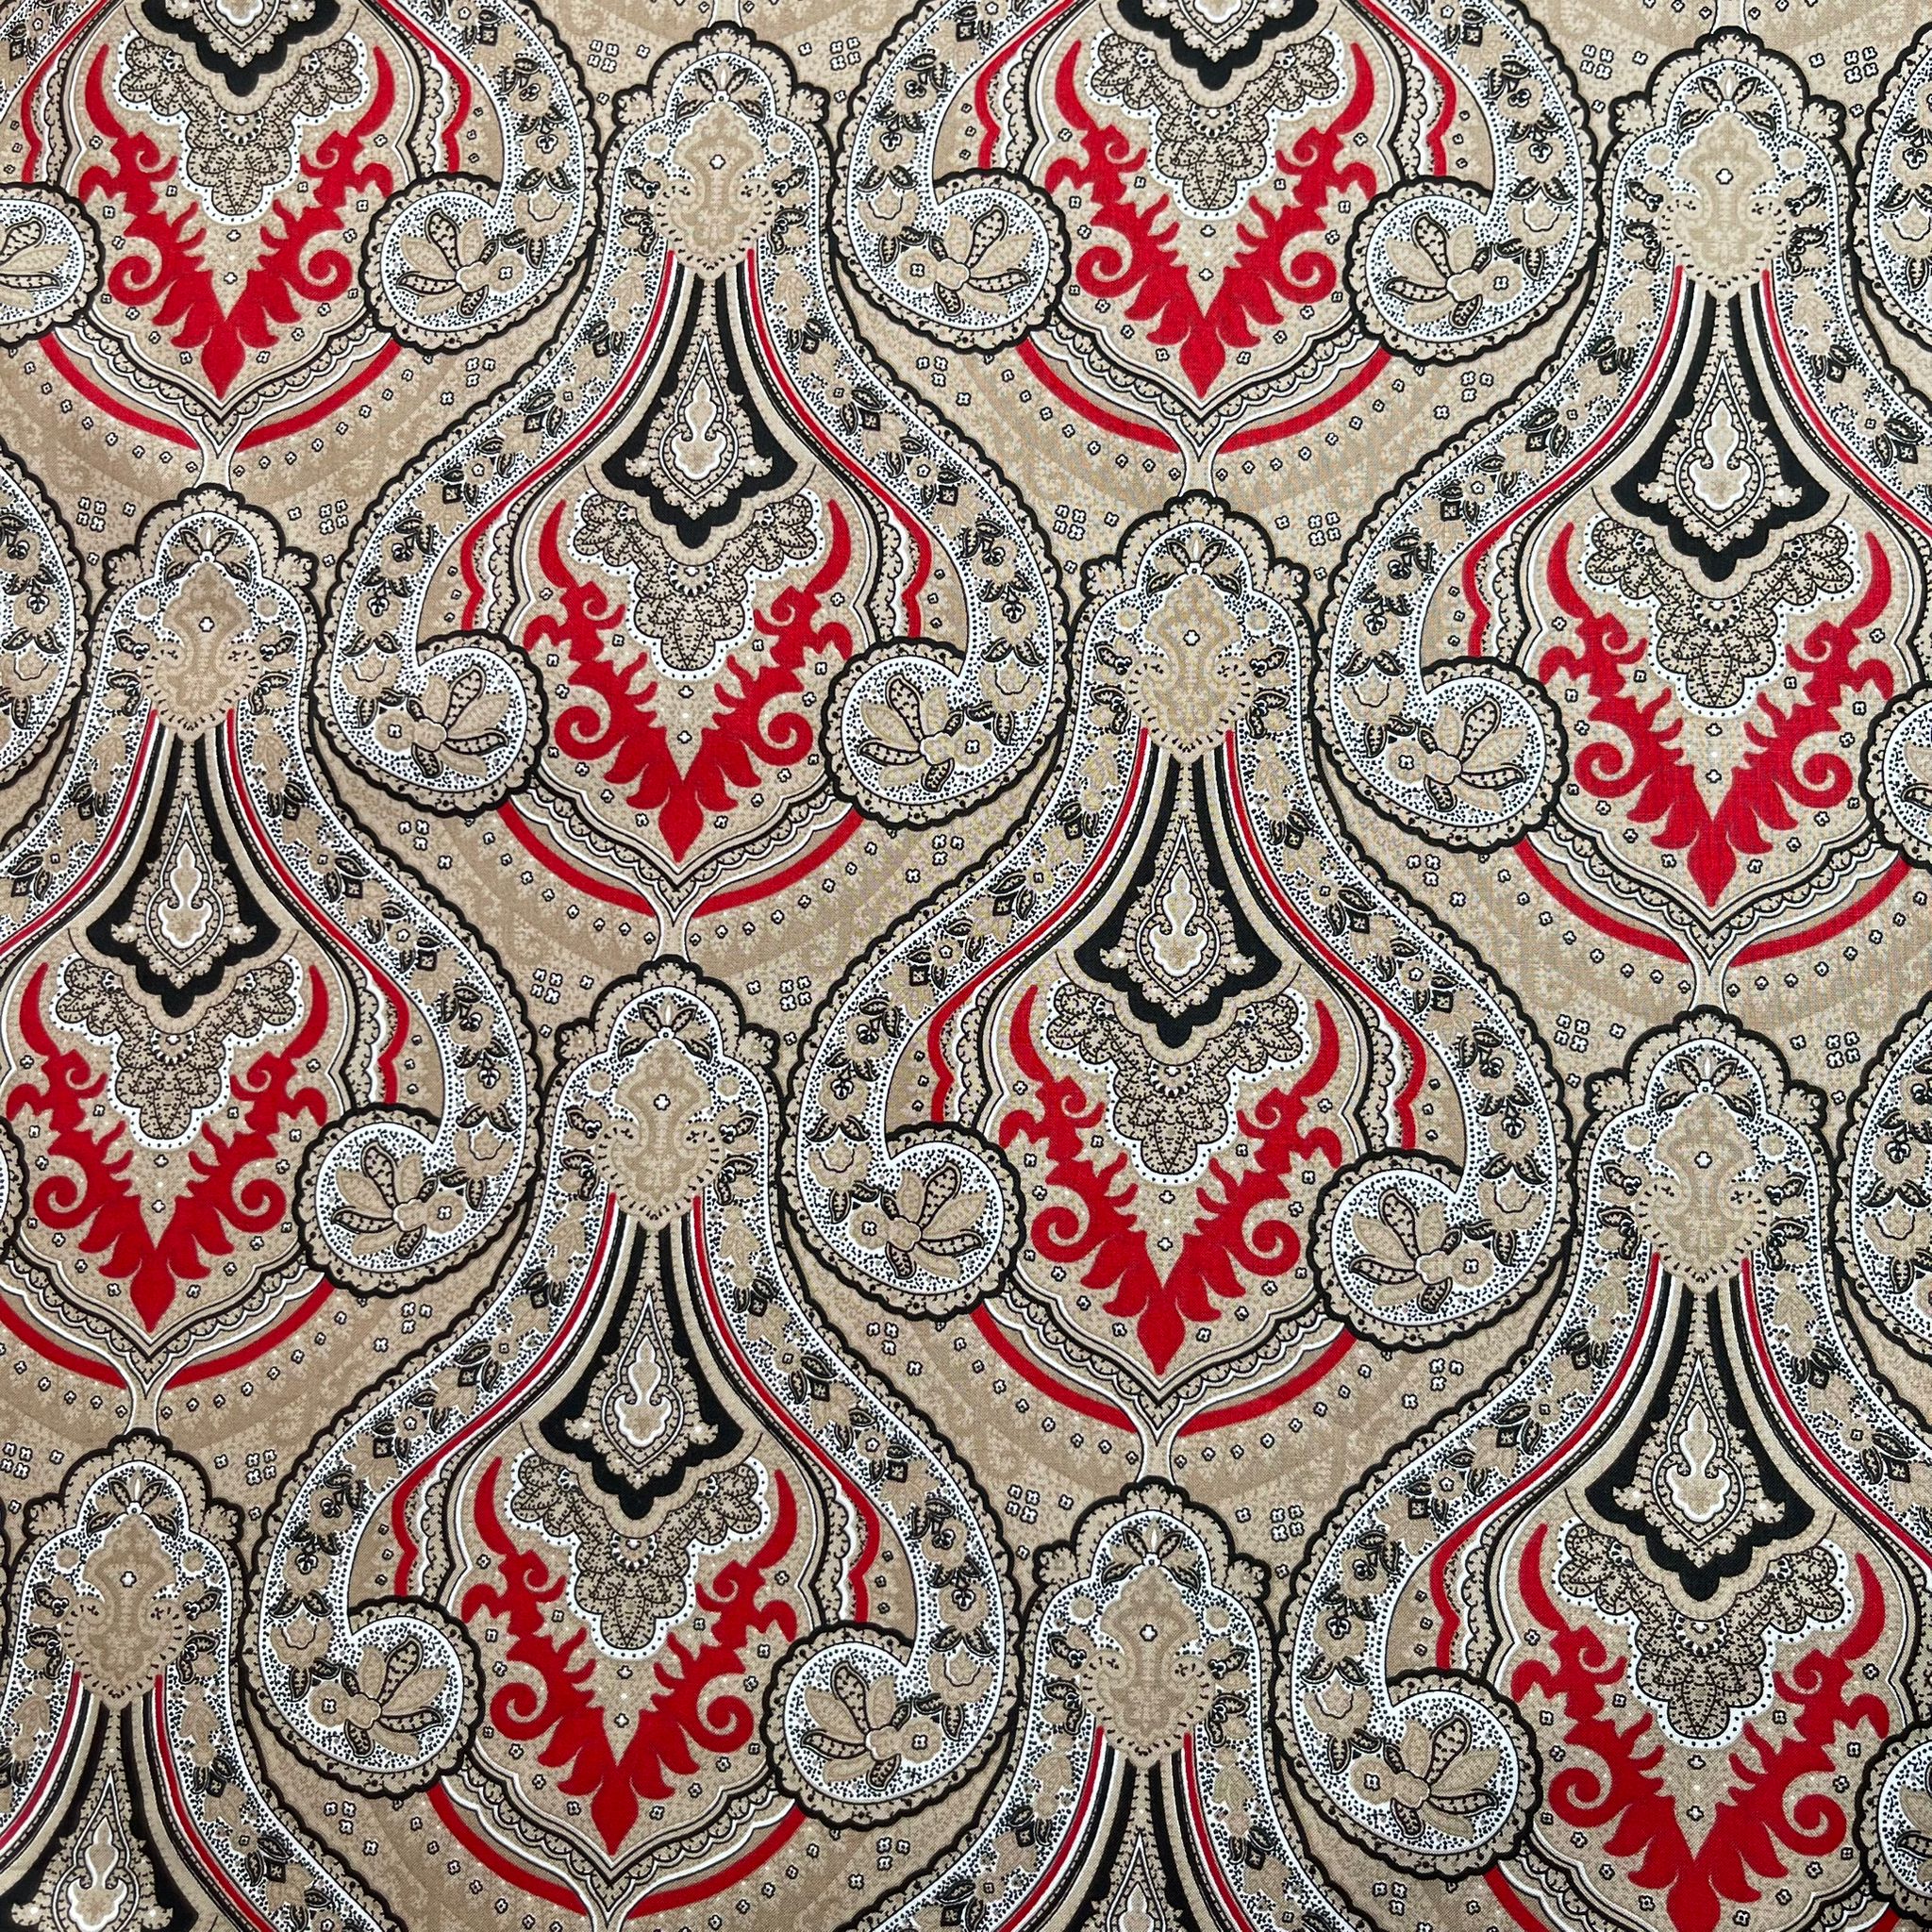 Ornate Damask on Red Cotton Lawn Fabric